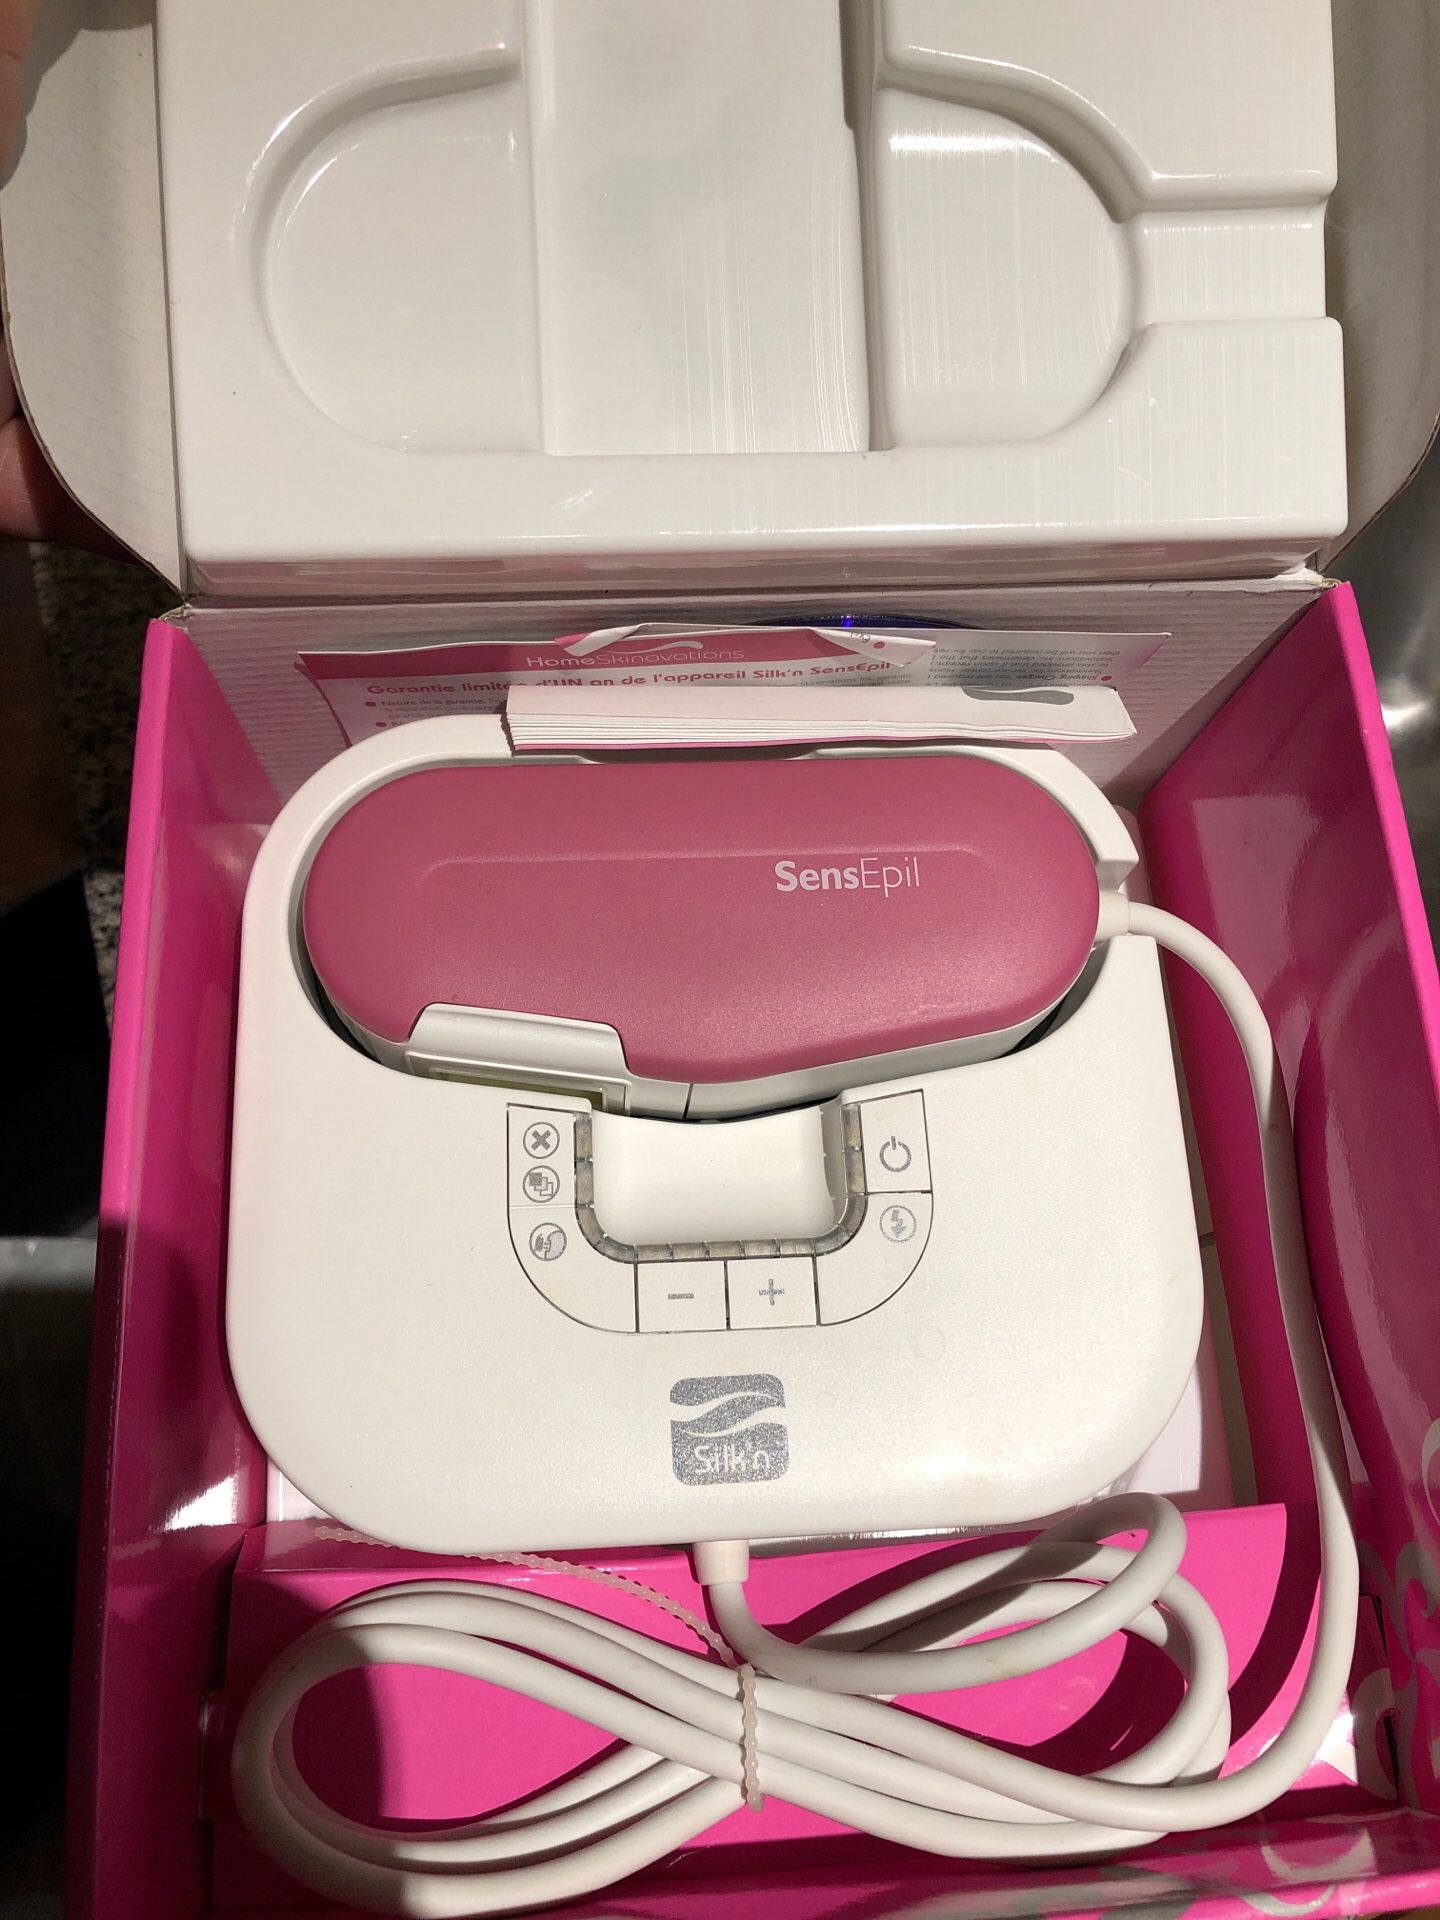 Laser hair removal machine for Sale in San Antonio, TX - OfferUp